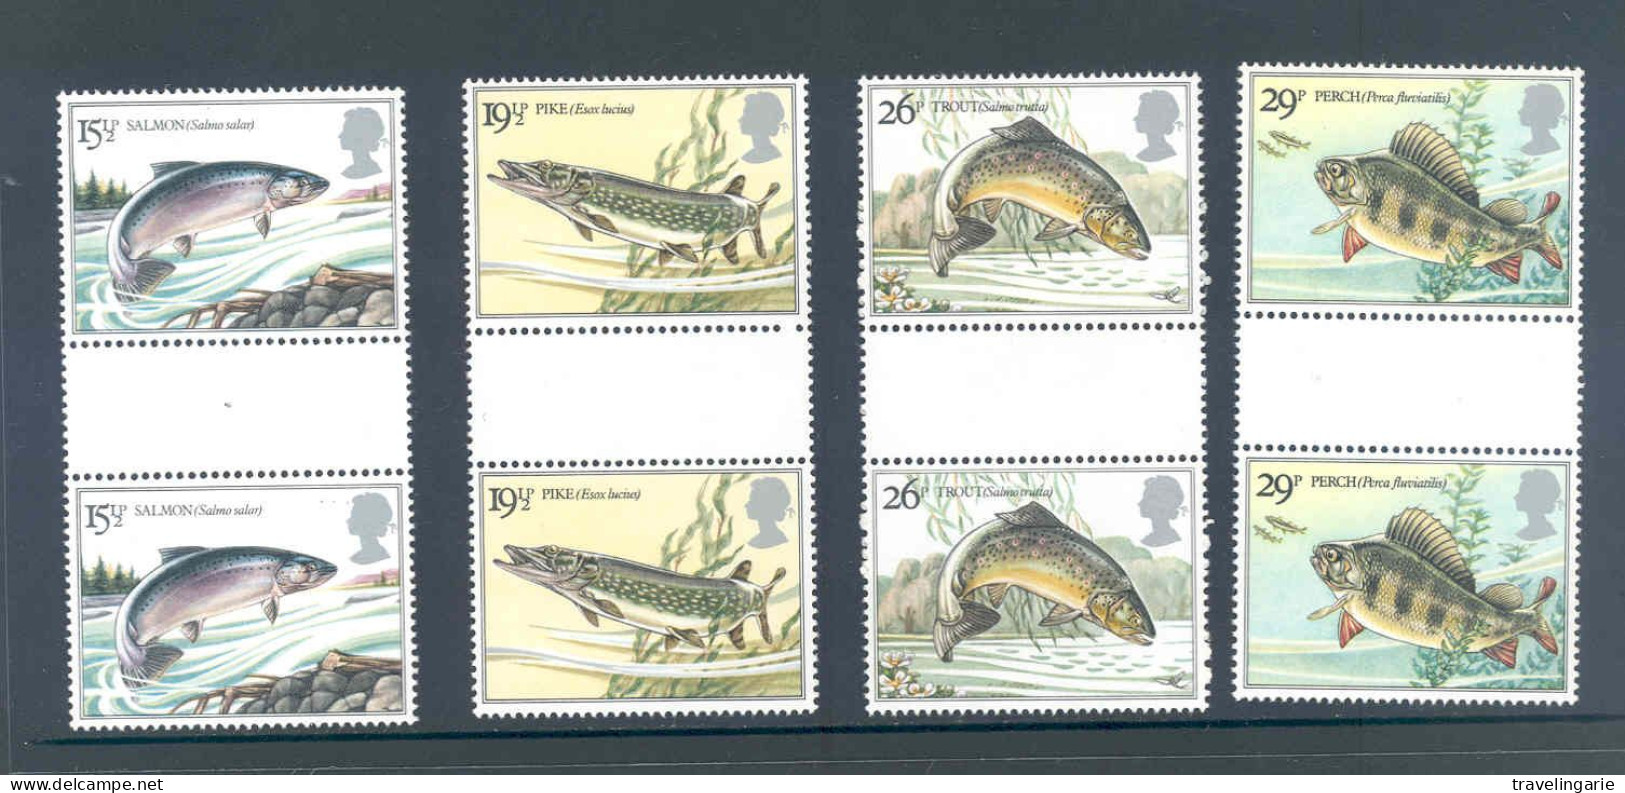 Great Britain 1983 British River Fish Gutter Pairs MNH ** - Fishes